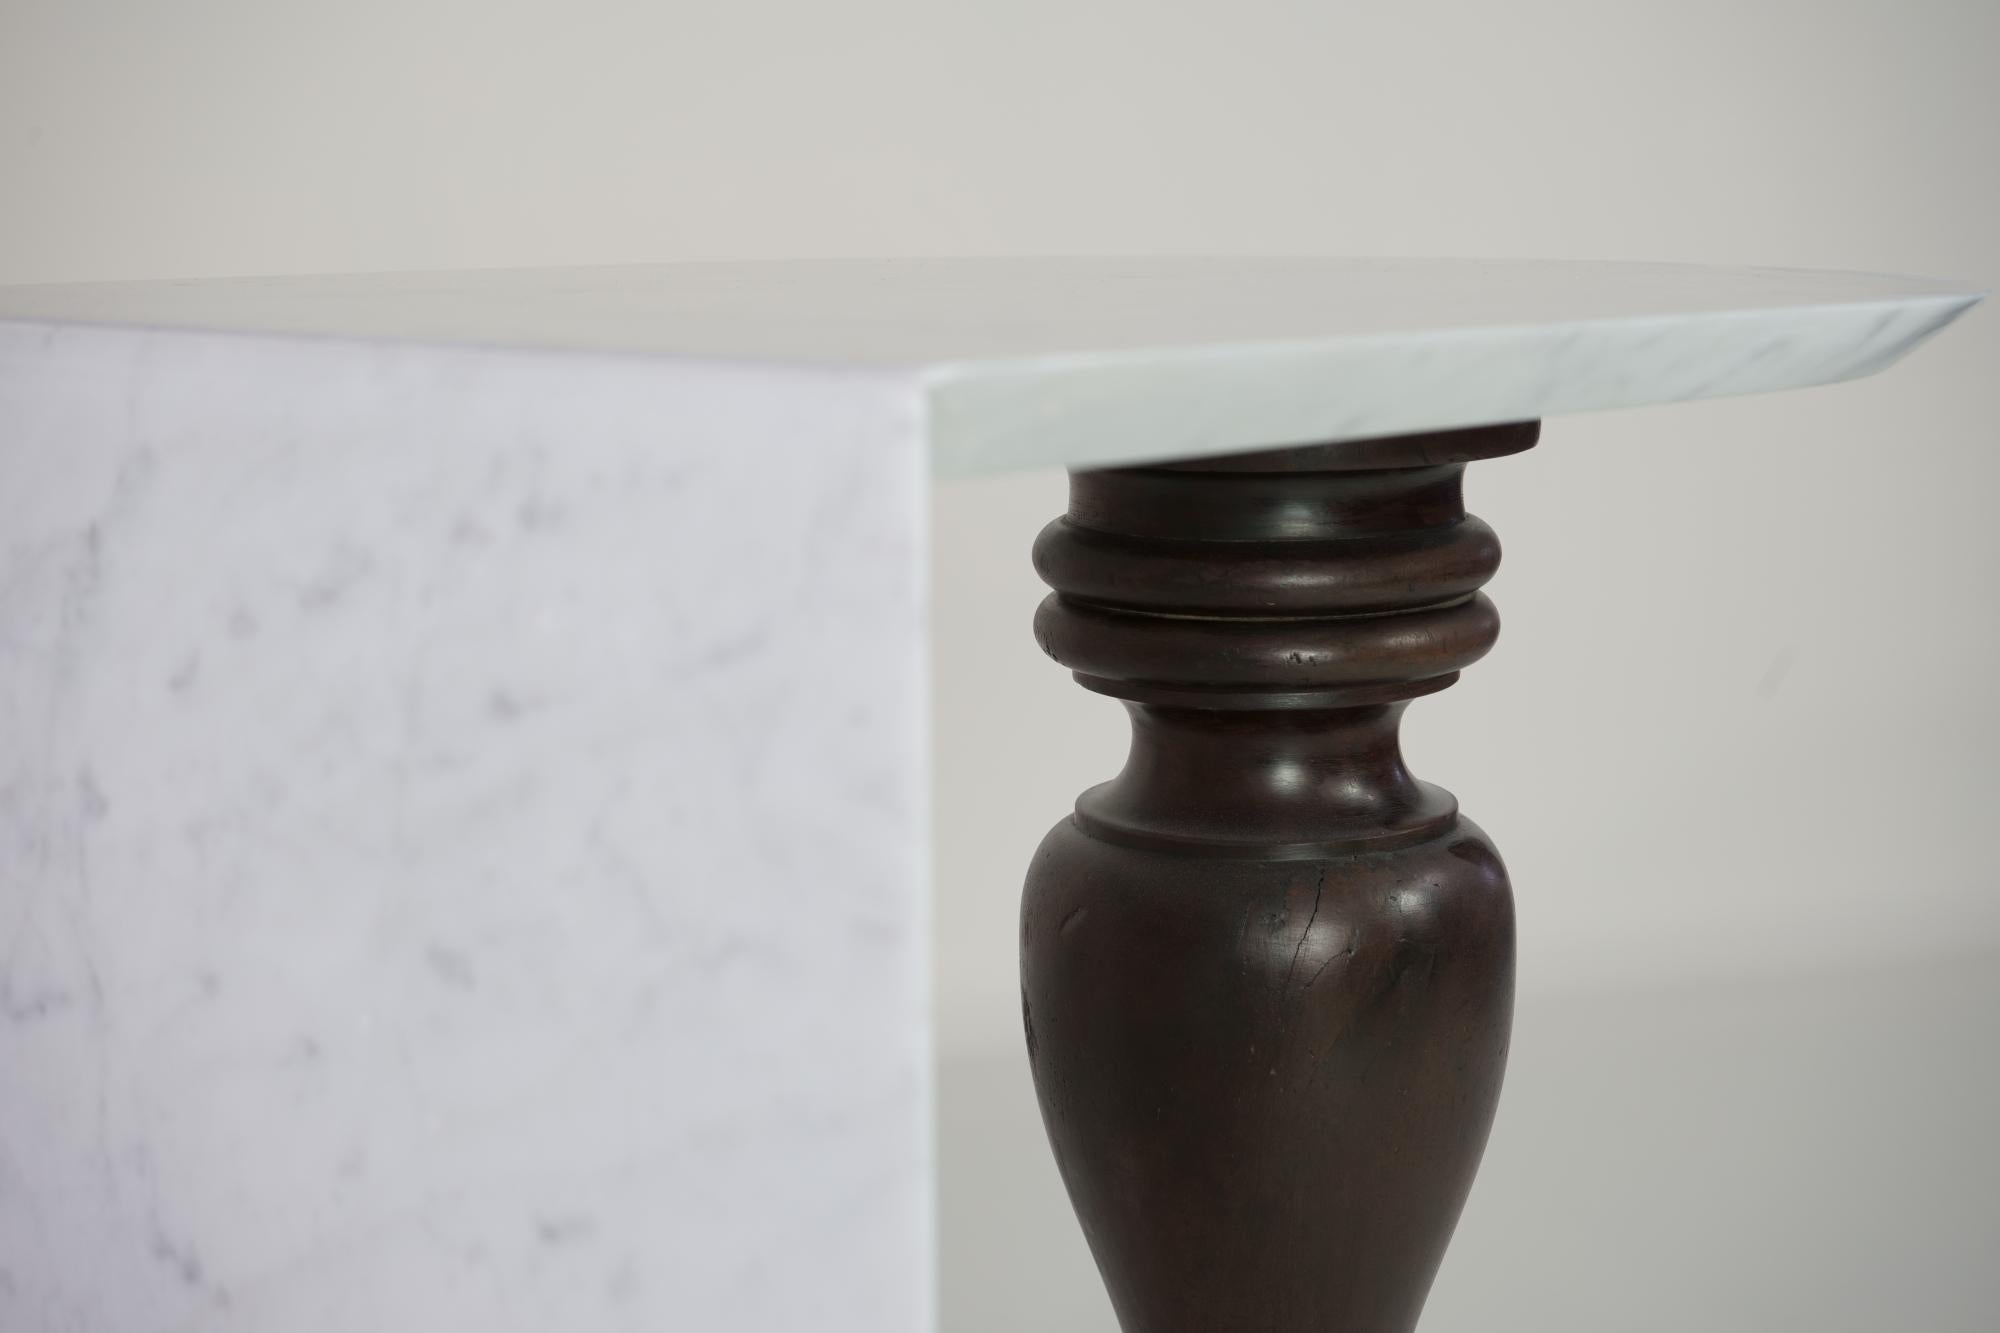 Pianoforte - Carrara Marble Side Table By DFdesignlab Handmade in Italy In New Condition For Sale In Campobasso, CB